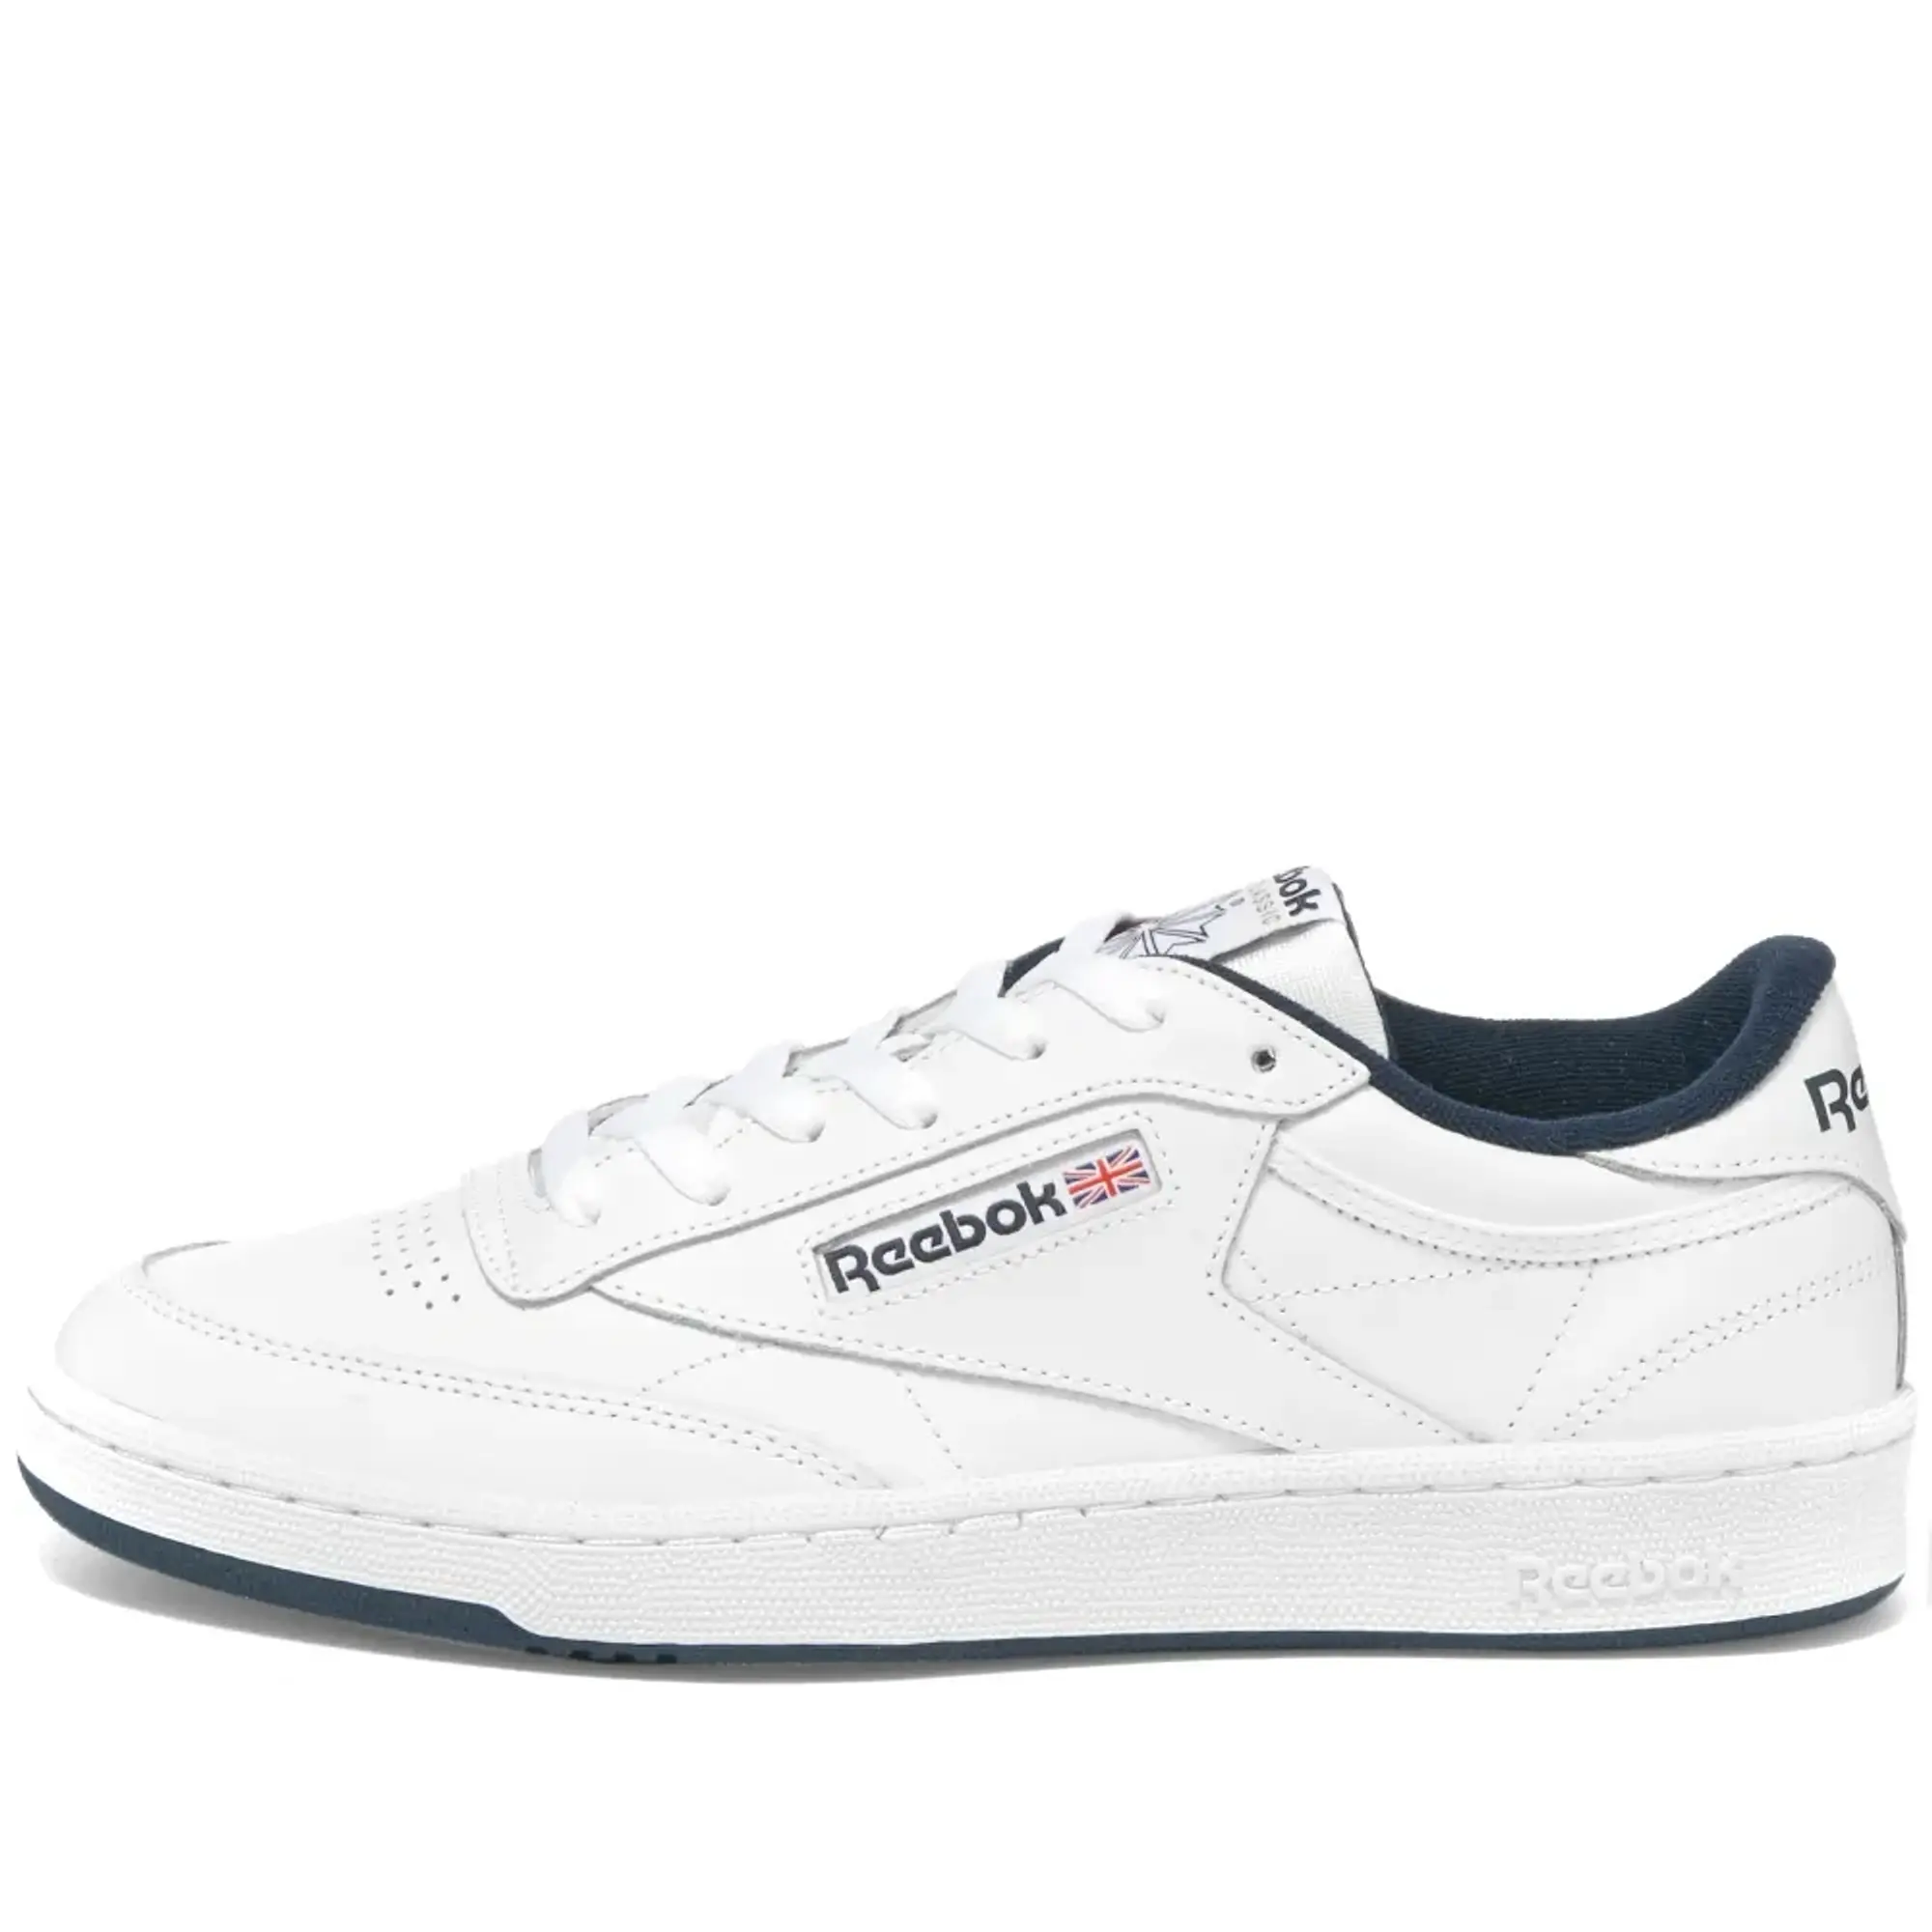 Reebok Classics Club C 85 Trainers In White With Navy Tab